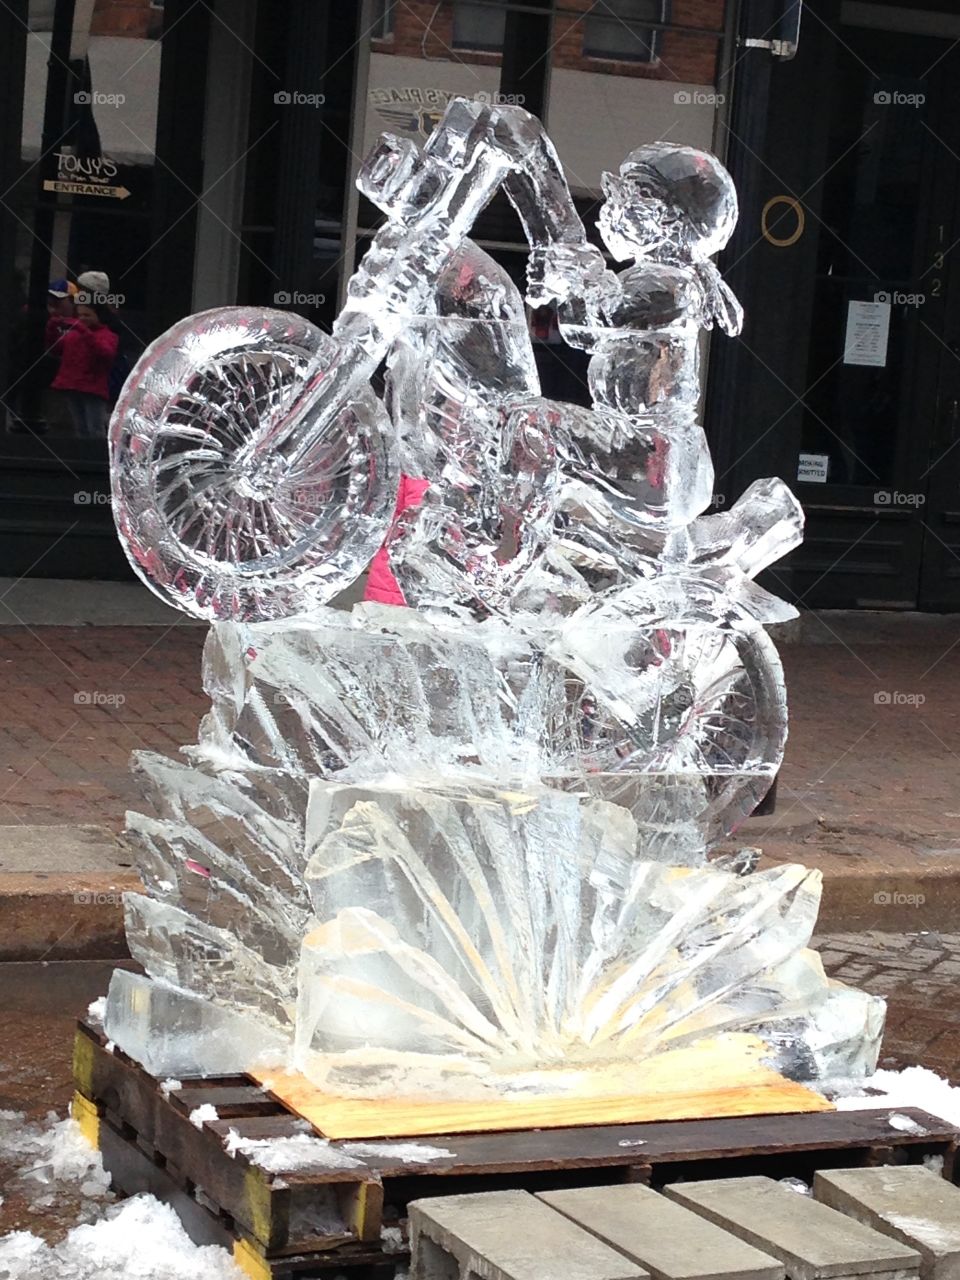 Ice carving contest in St. Charles, IL motorcycle